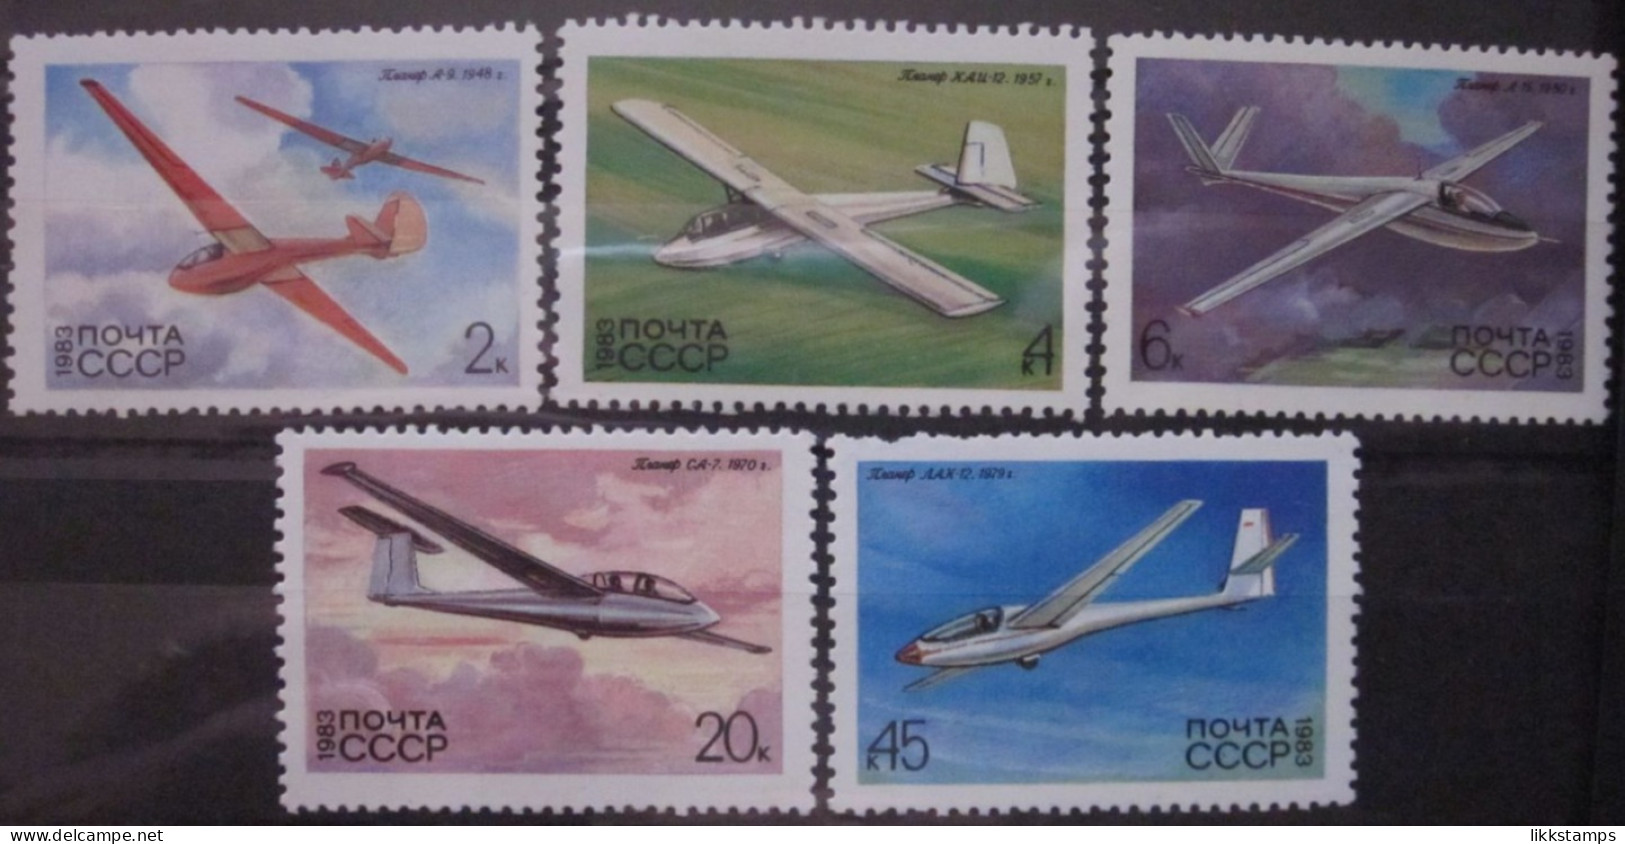 RUSSIA ~ 1983 ~ S.G. NUMBERS 5301 - 5305, ~ GLIDERS. ~ MNH #03633 - Ungebraucht